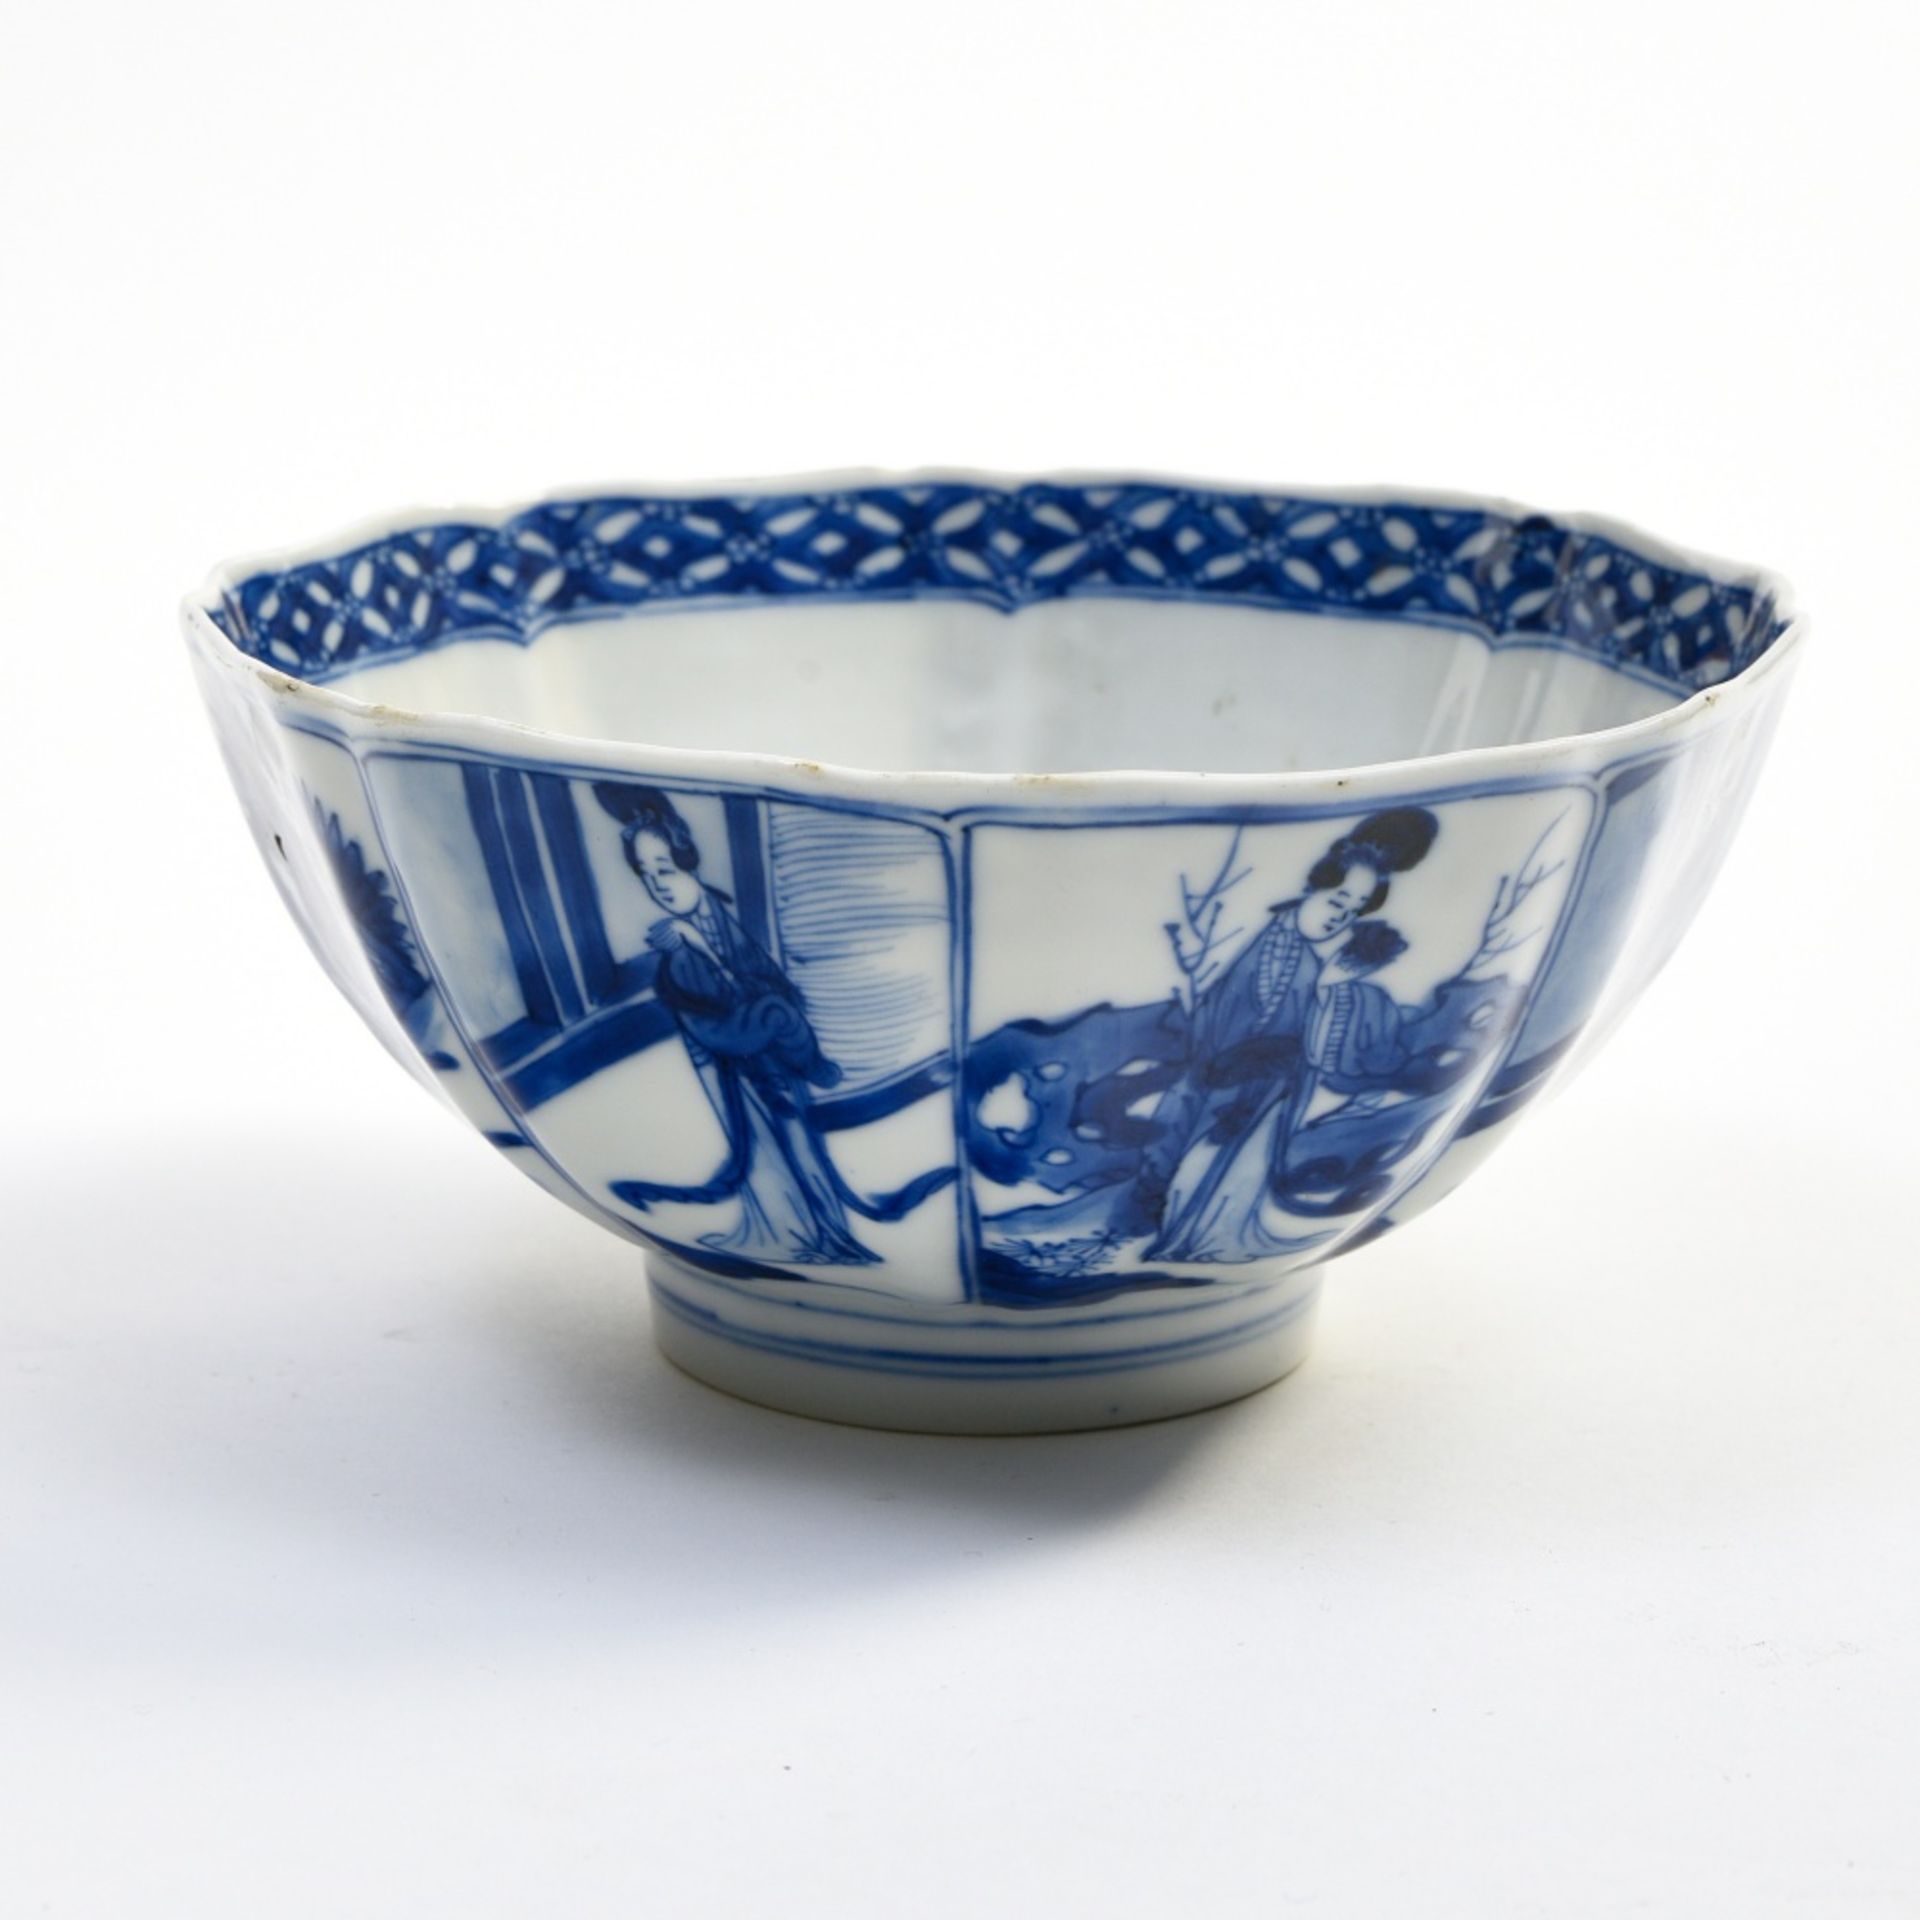 China, 18th century or earlier Multifaceted bowl, Blue and white porcelain decorated with children - Image 3 of 6